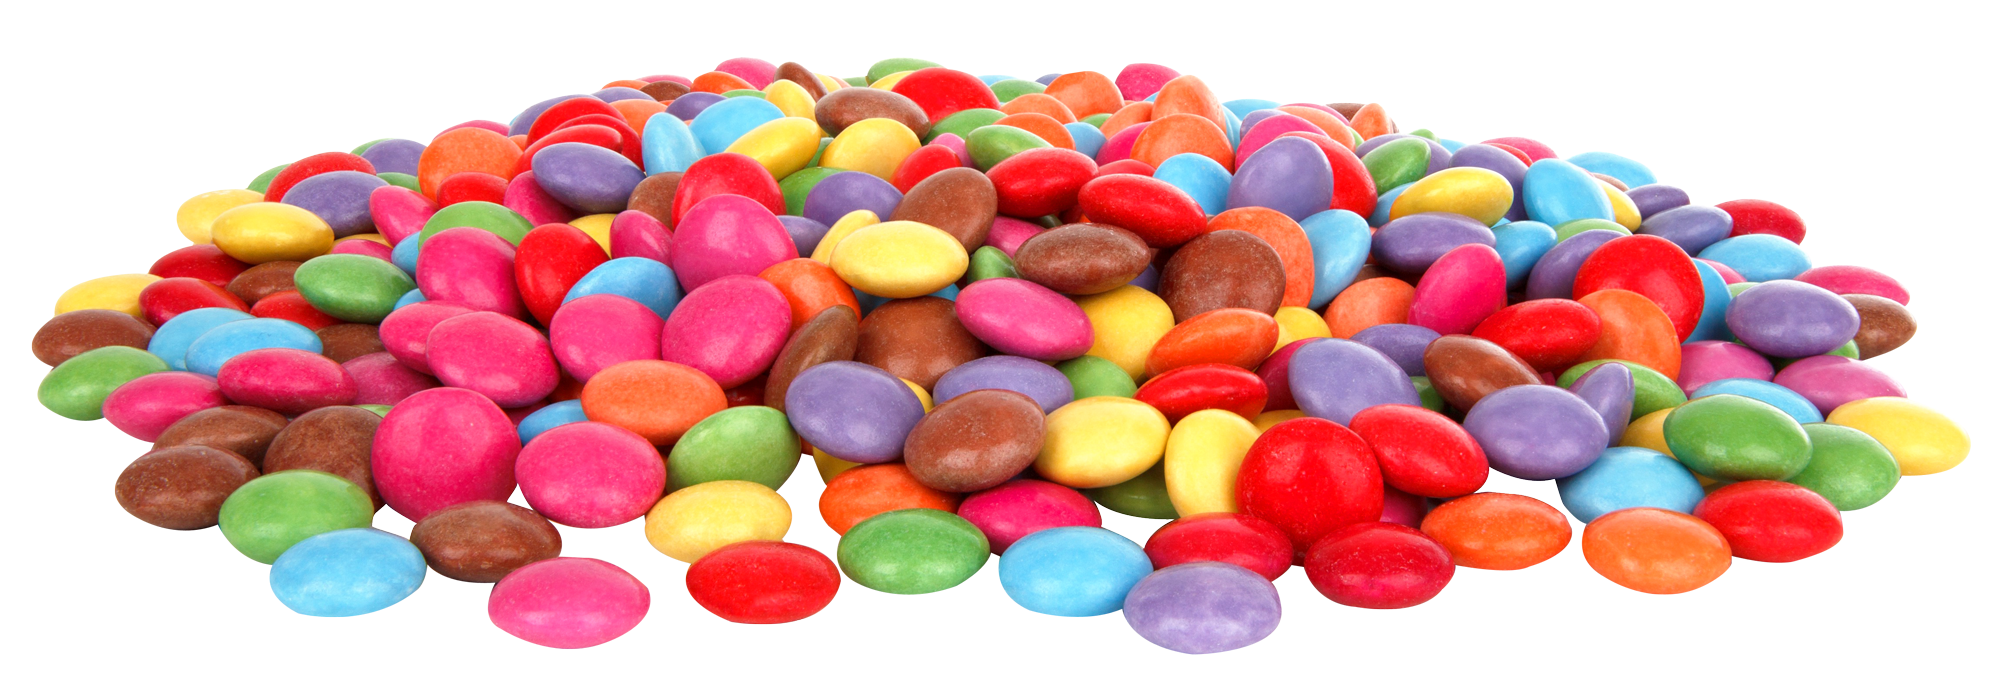 Candy PNG Kostenloser Download